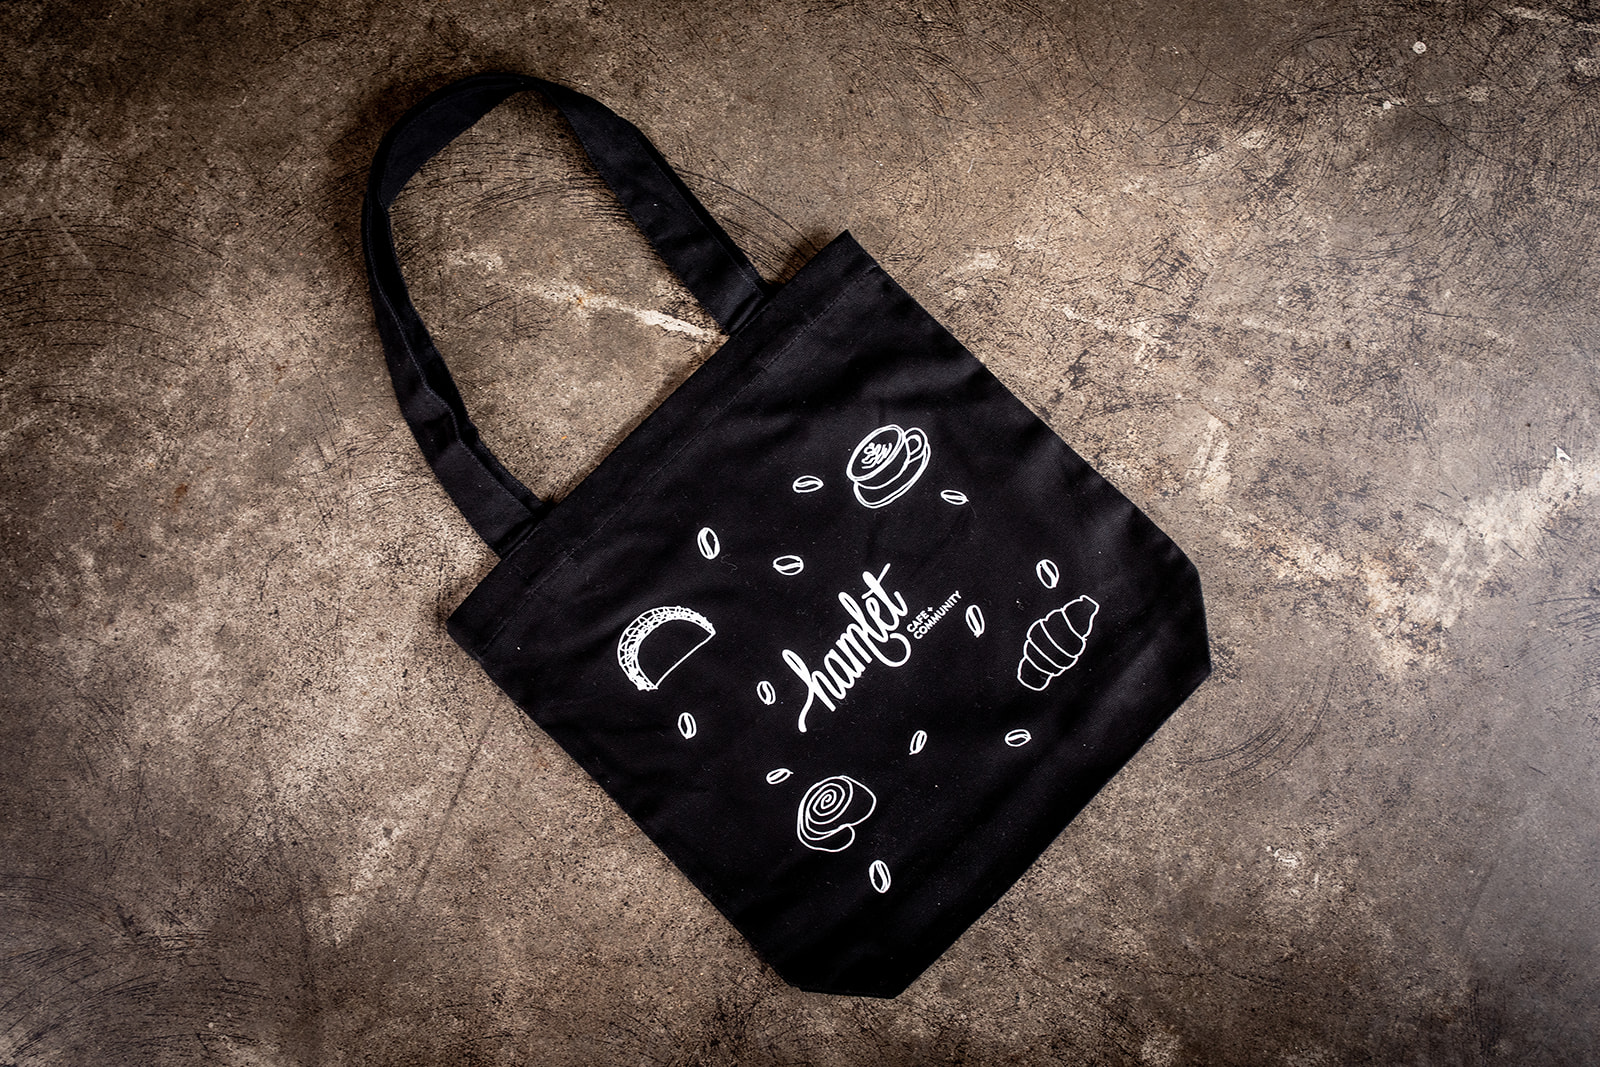 A black tote bag with white print, featuring the text Hamlet Cafe and Community surrounded by simple line drawings of cafe food.